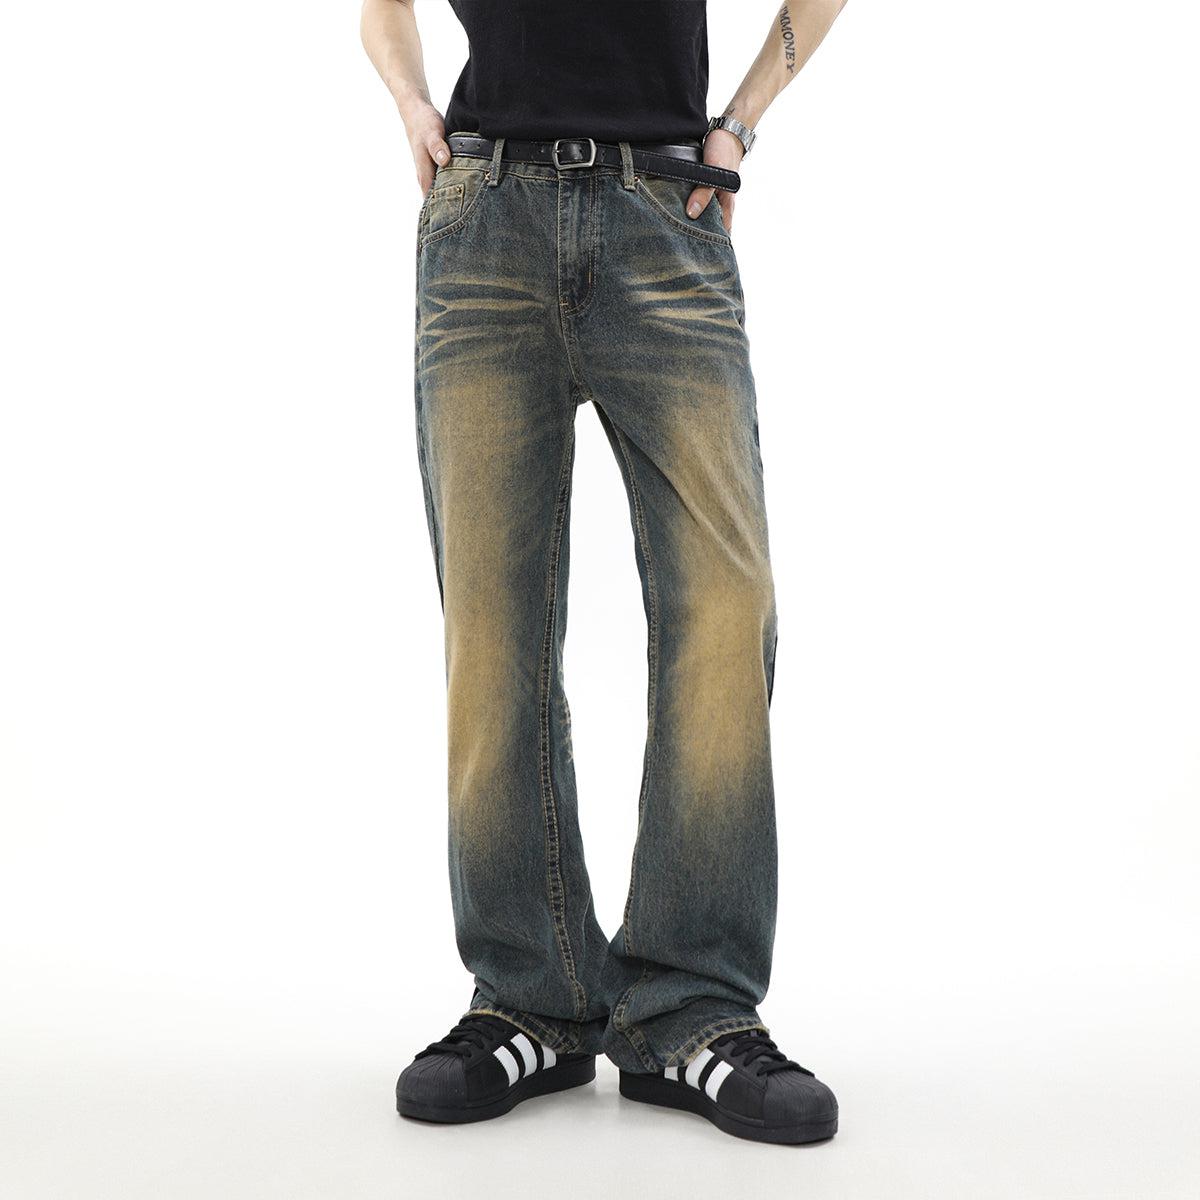 Mr Nearly Gradient Washed Ripped Pocket Jeans Korean Street Fashion Jeans By Mr Nearly Shop Online at OH Vault